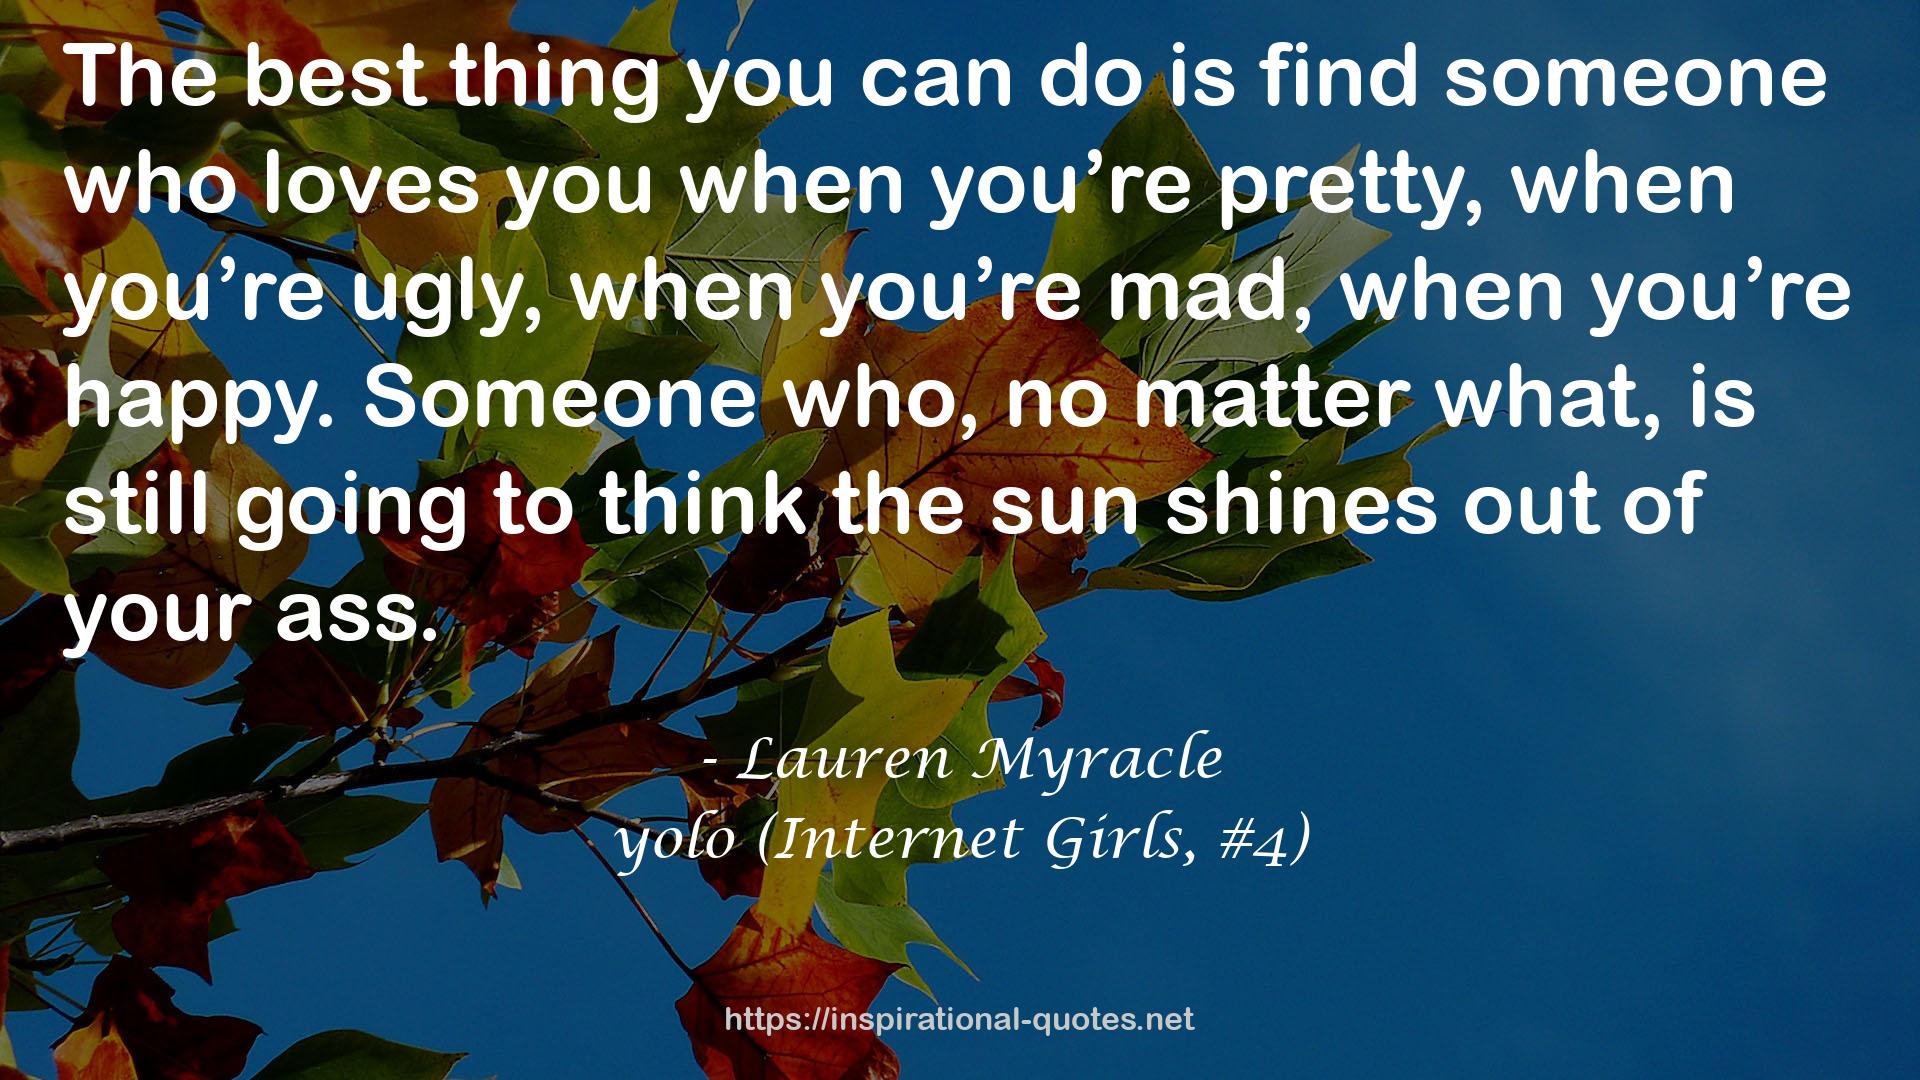 yolo (Internet Girls, #4) QUOTES